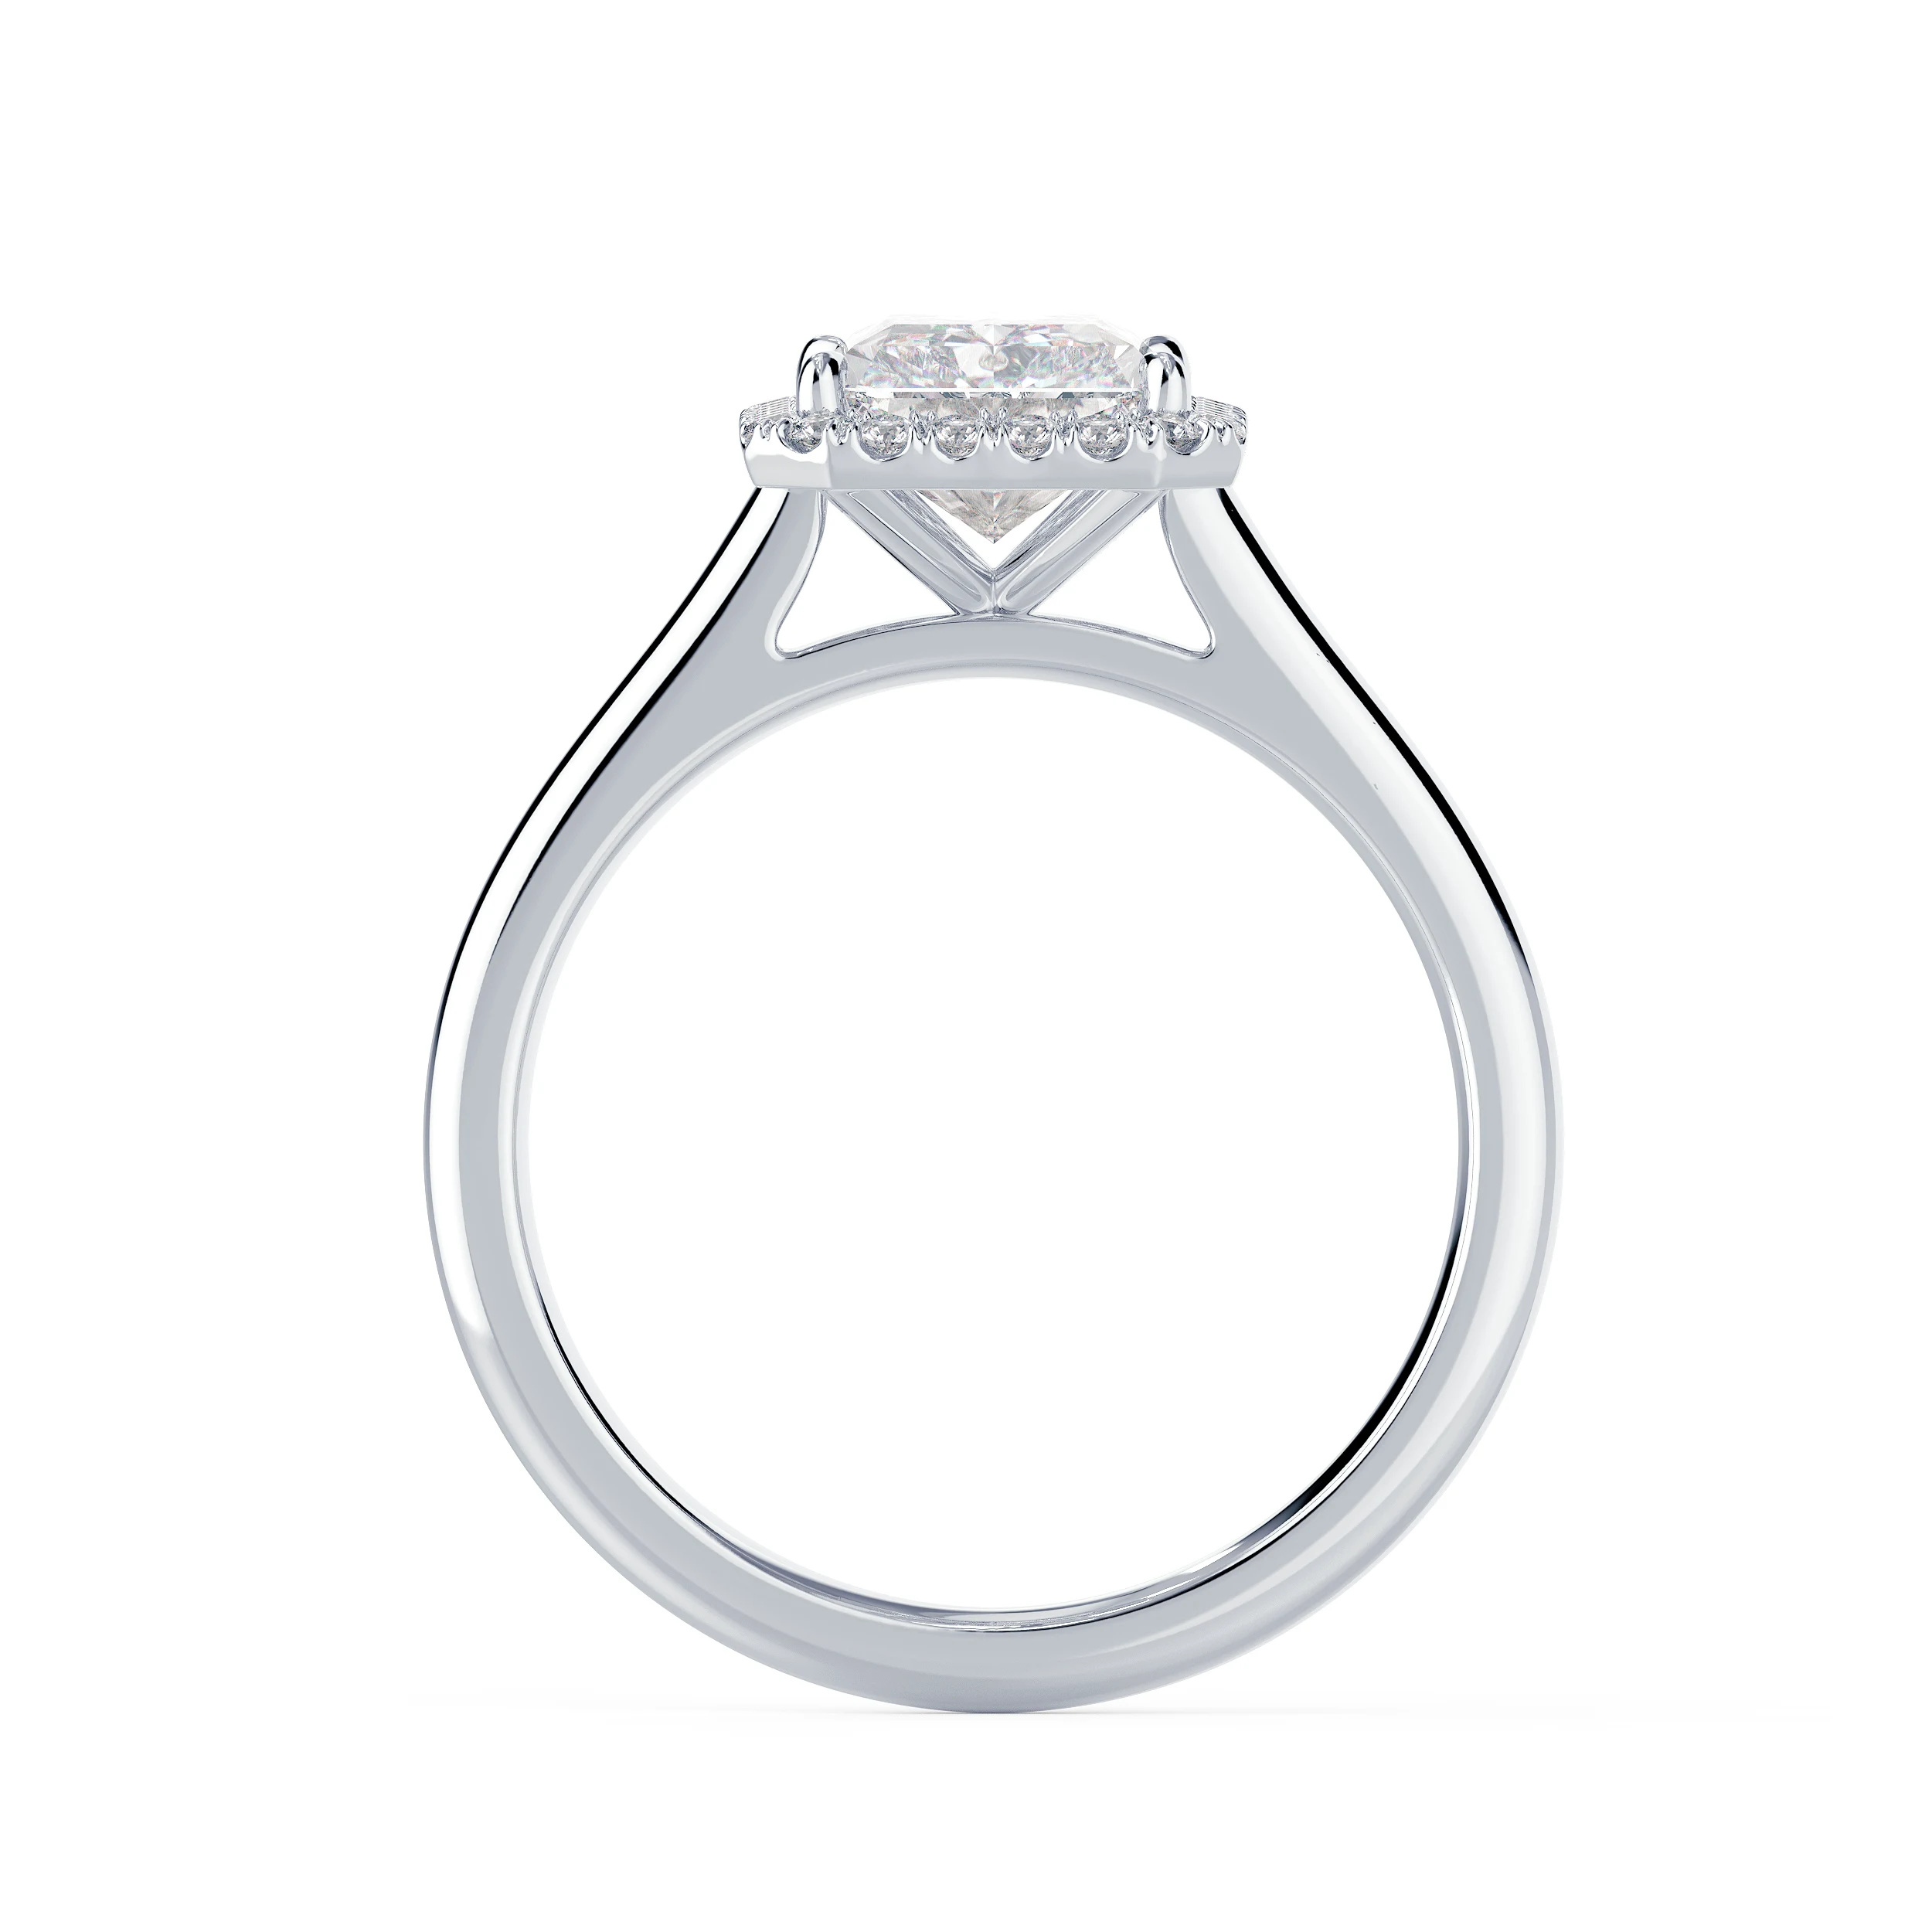 White Gold Radiant Single Halo Setting featuring Hand Selected Lab Diamonds (Profile View)